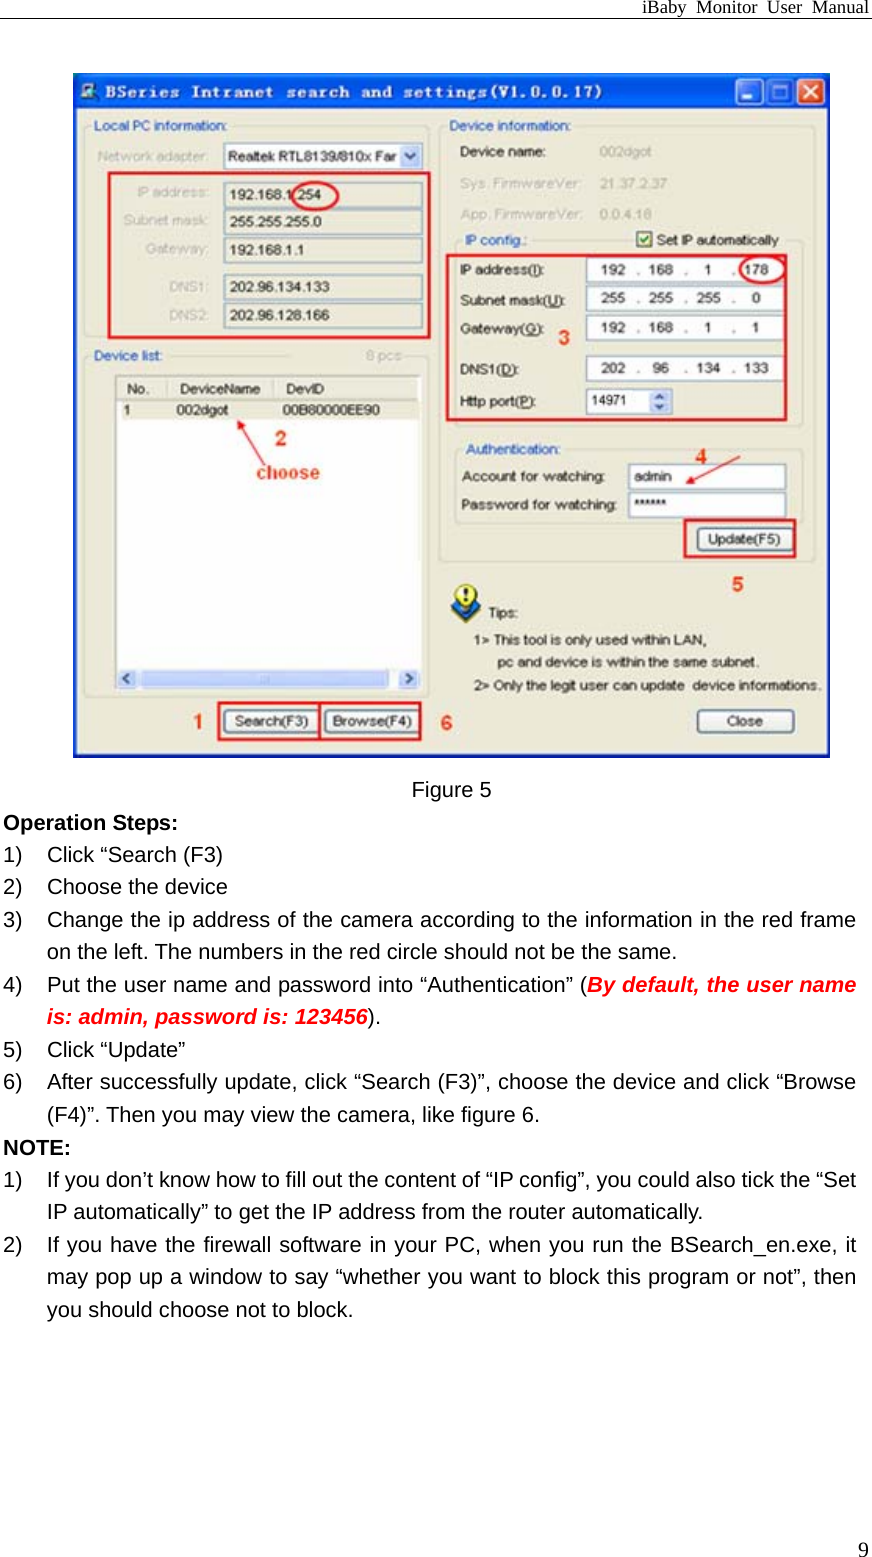 iBaby Monitor User Manual  Figure 5 Operation Steps: 1)  Click “Search (F3) 2) Choose the device 3)  Change the ip address of the camera according to the information in the red frame on the left. The numbers in the red circle should not be the same.   4)  Put the user name and password into “Authentication” (By default, the user name is: admin, password is: 123456). 5) Click “Update” 6)  After successfully update, click “Search (F3)”, choose the device and click “Browse (F4)”. Then you may view the camera, like figure 6. NOTE: 1)  If you don’t know how to fill out the content of “IP config”, you could also tick the “Set IP automatically” to get the IP address from the router automatically. 2)  If you have the firewall software in your PC, when you run the BSearch_en.exe, it may pop up a window to say “whether you want to block this program or not”, then you should choose not to block.  9